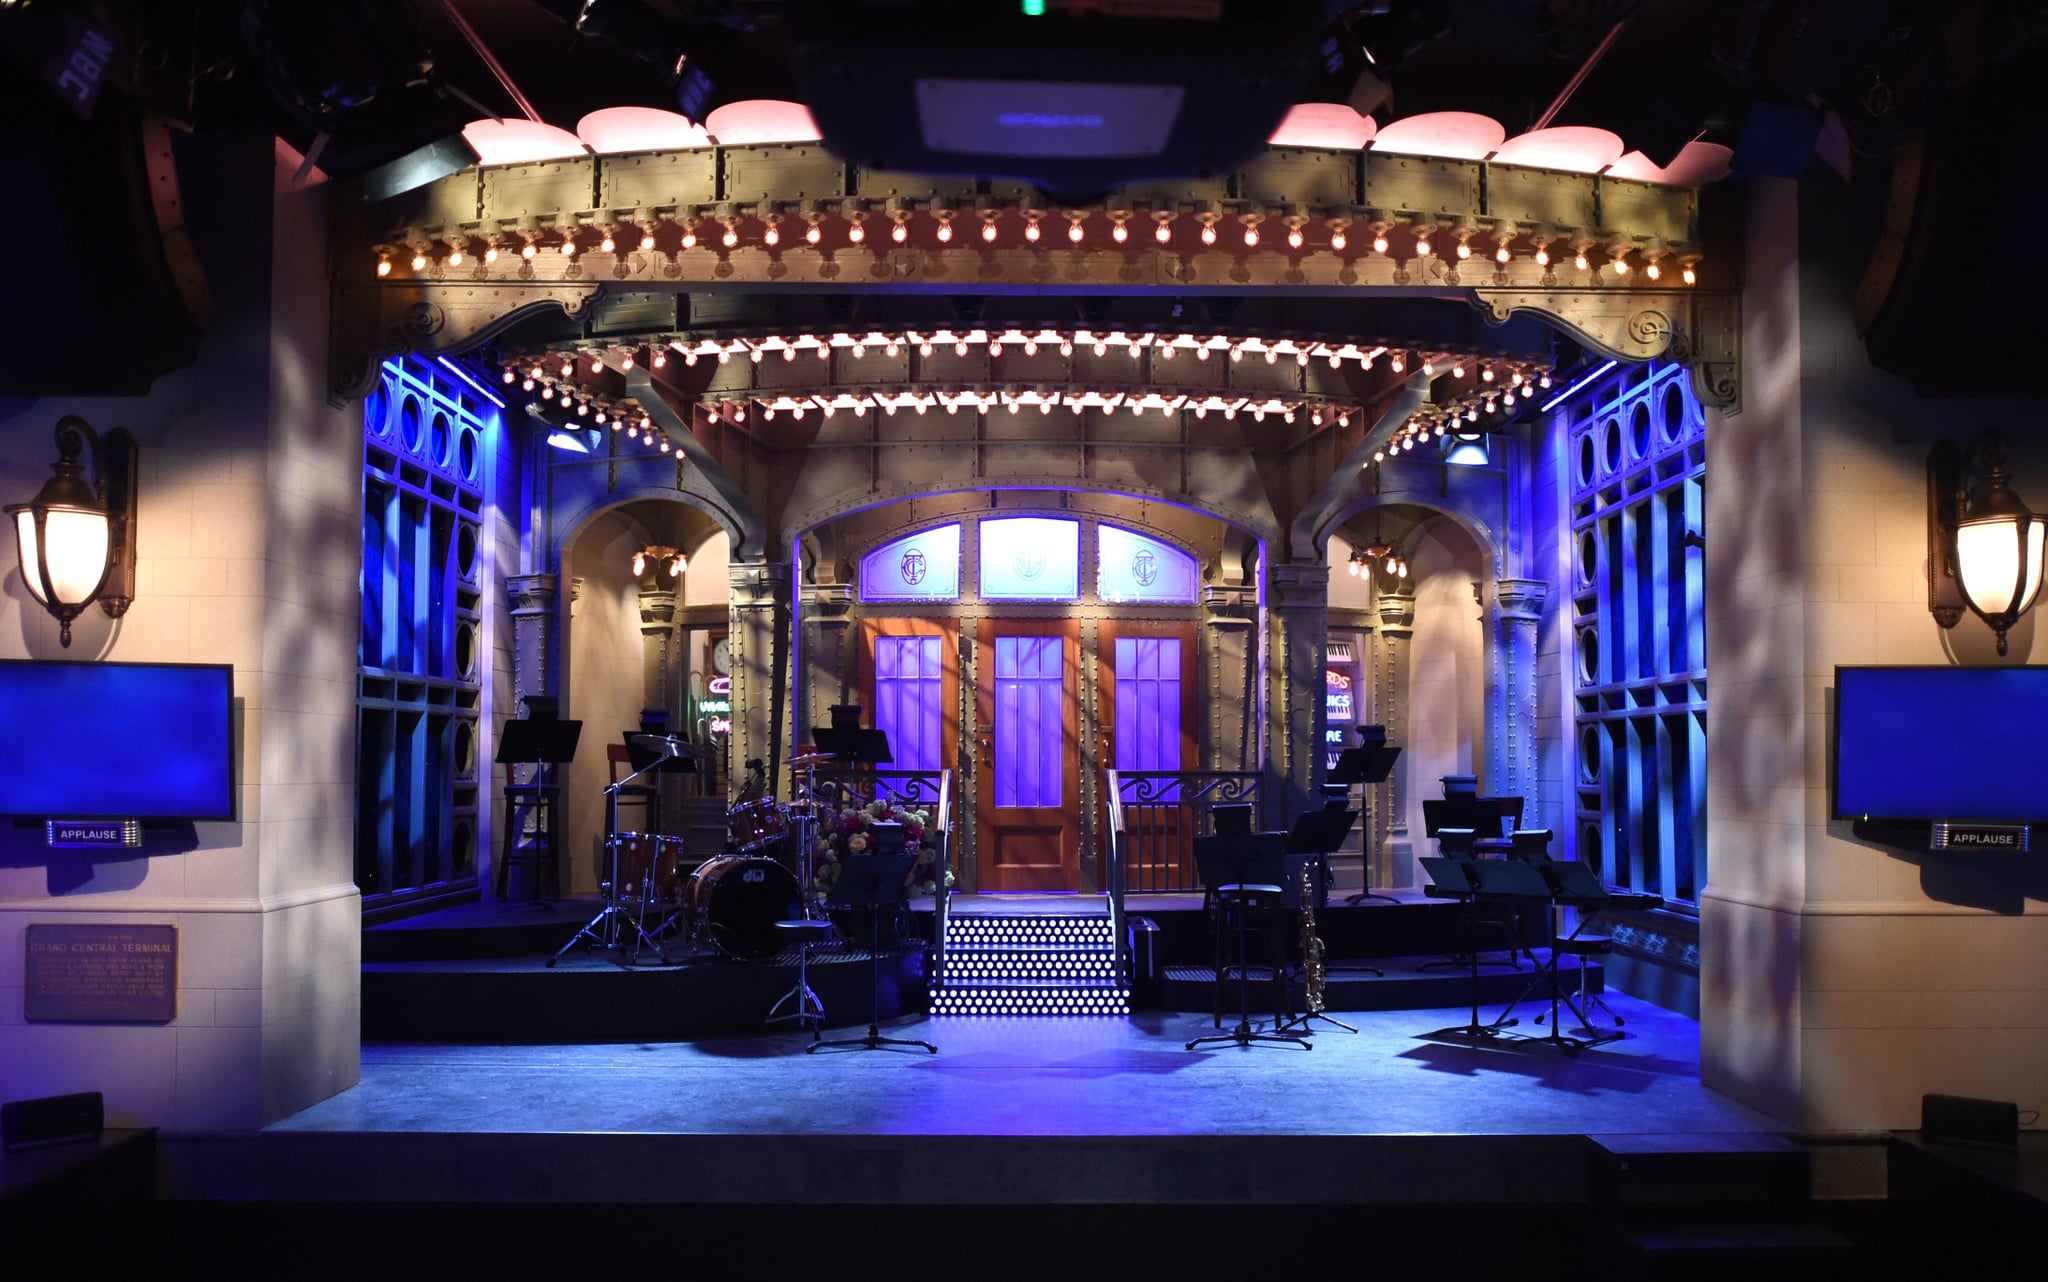 The SNL stage on  display during a media preview on May 29, 2015 at the Saturday Night Live: The Exhibition, celebrating the NBC programs 40-year history. The exhibit, which opens May 30, will illustrate a week in the life of SNL's offices and studios in 30 Rockefeller Center - complete with original scripts, set  pieces, props, costumes, masks and interactive elements from the show's 40 years since debuting in October 1975.   AFP PHOTO  / TIMOTHY A. CLARY        (Photo credit should read TIMOTHY A. CLARY/AFP via Getty Images)